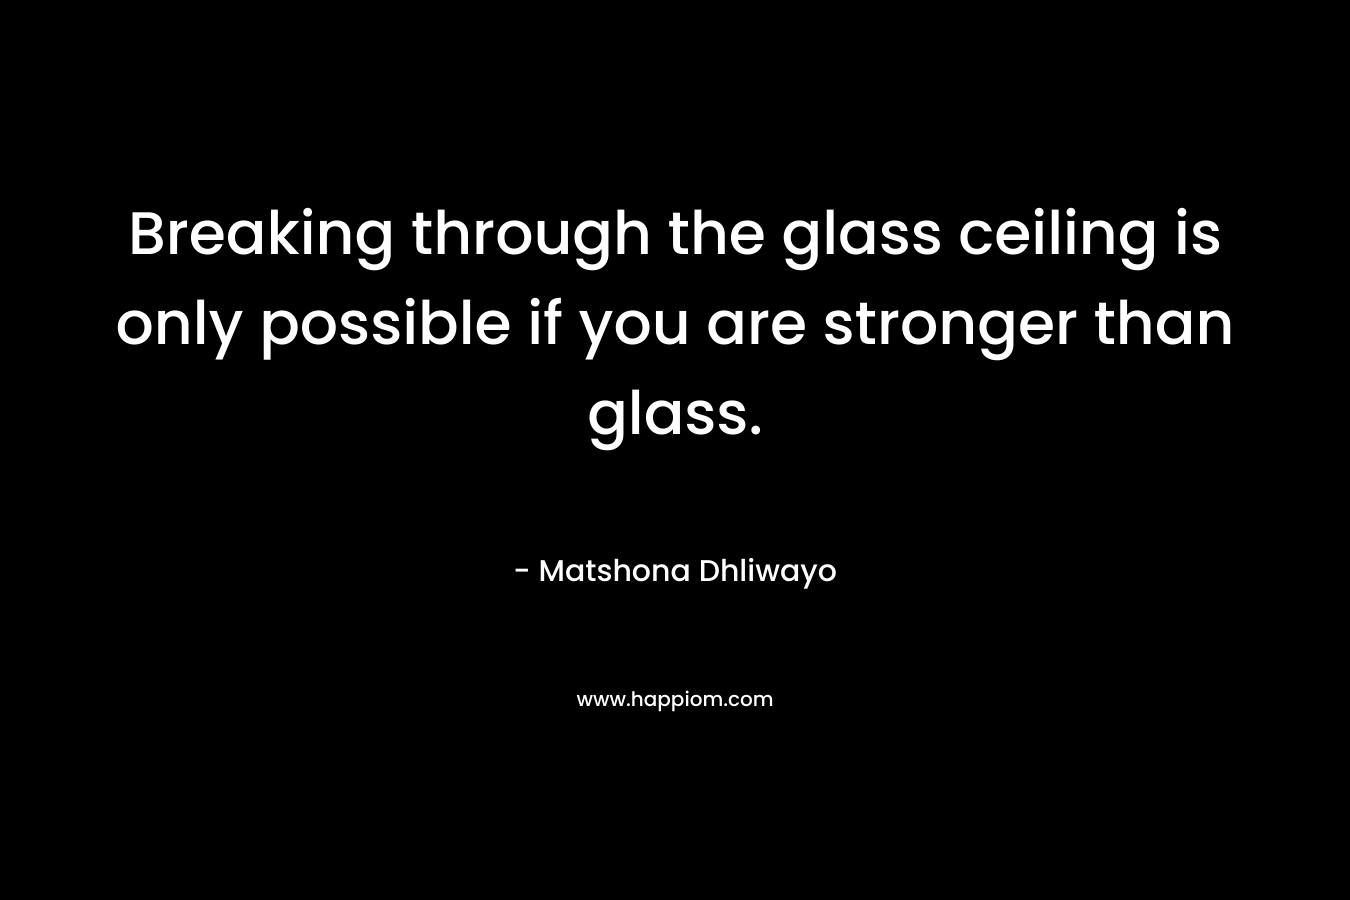 Breaking through the glass ceiling is only possible if you are stronger than glass.